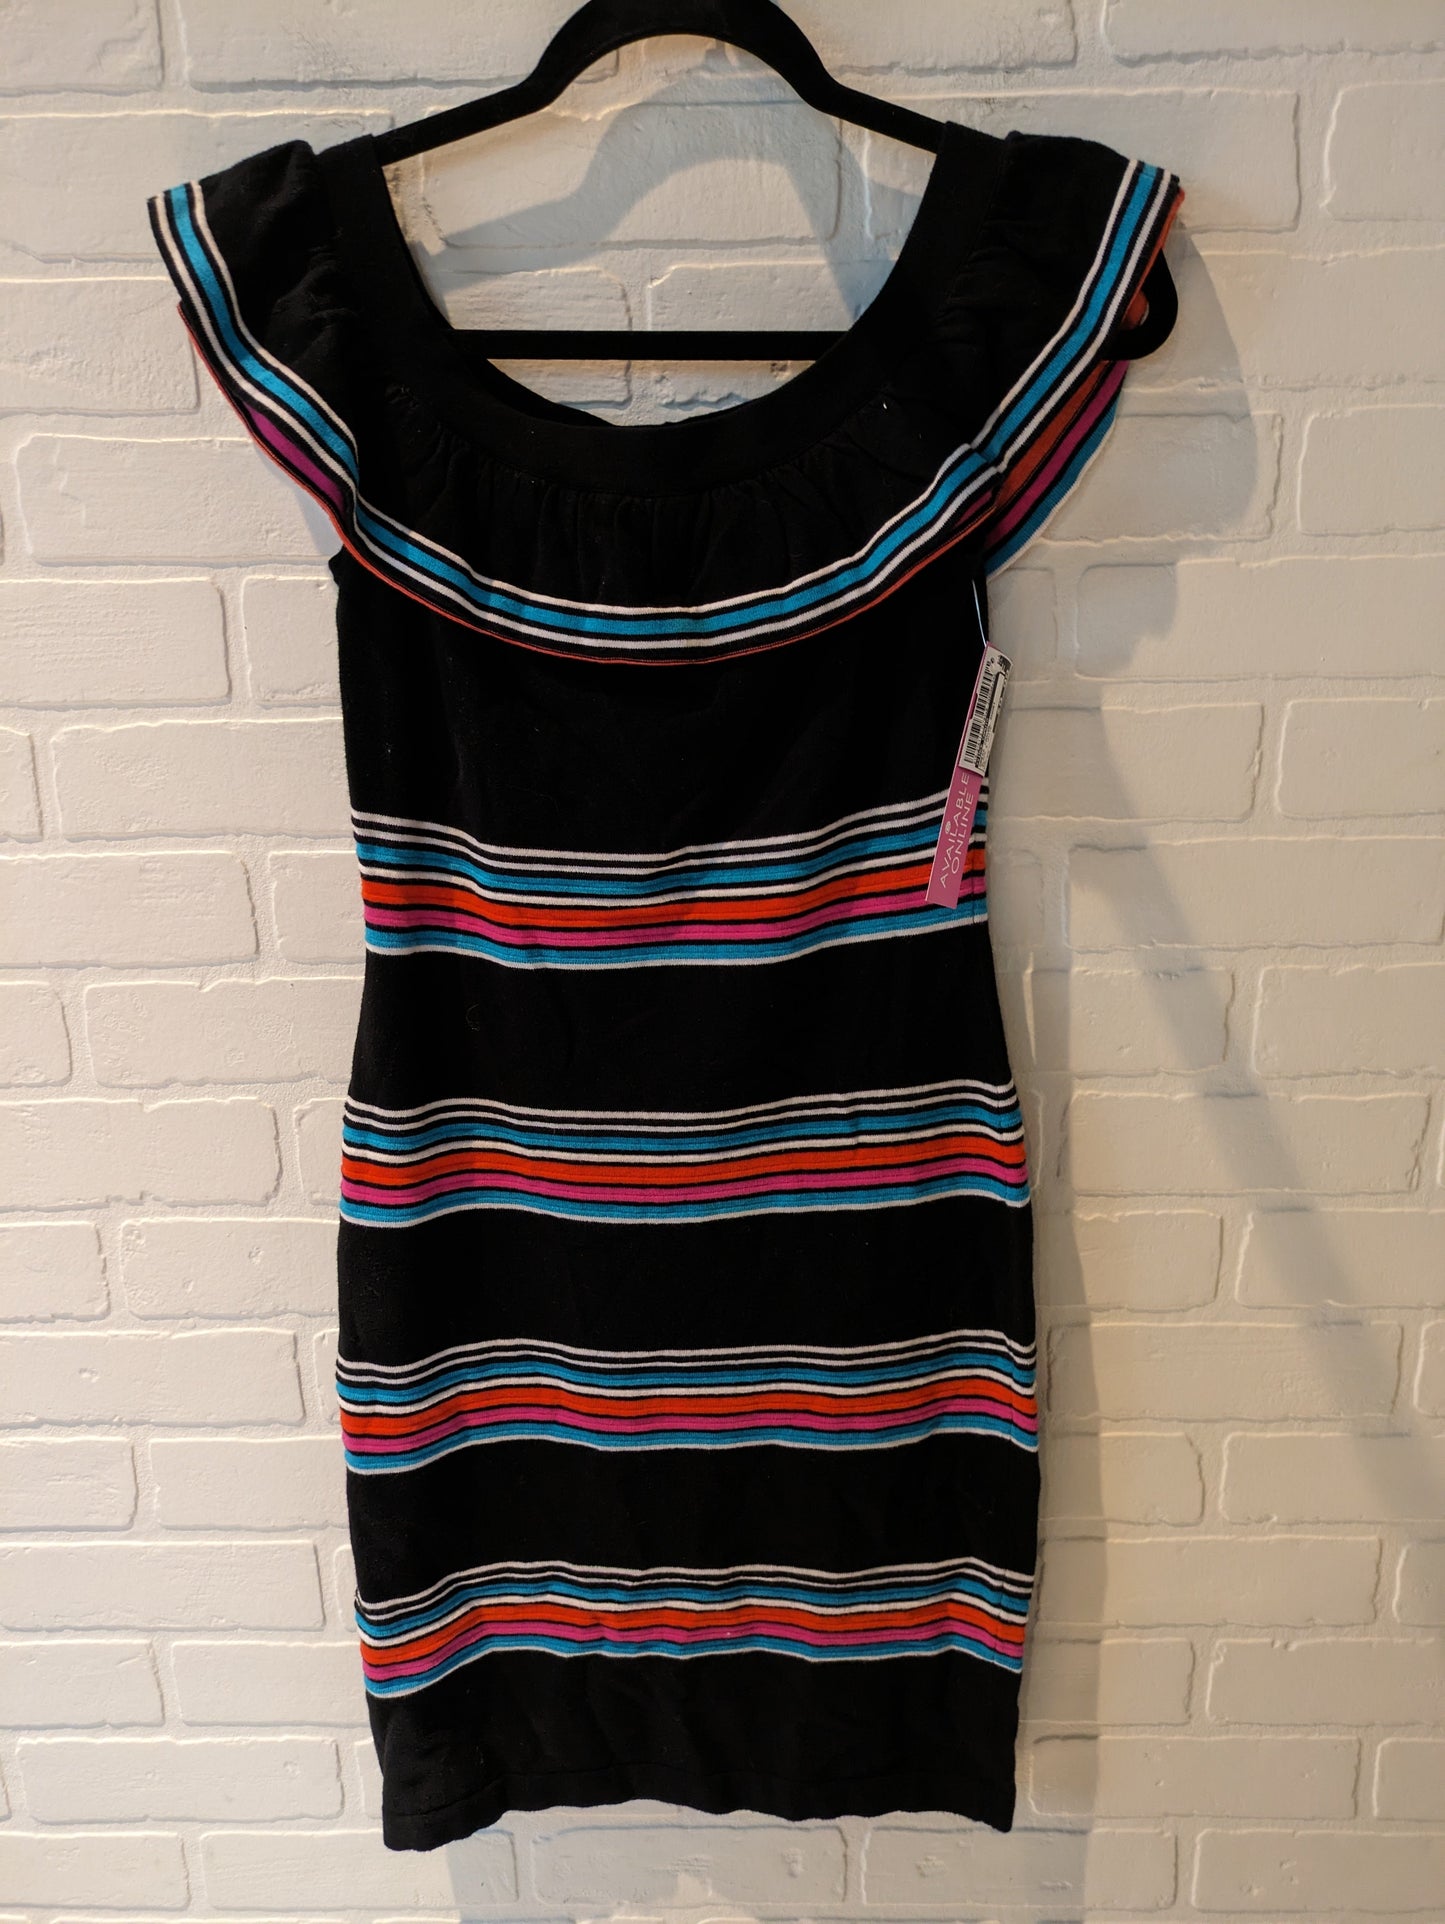 Black & White Dress Casual Short Vince Camuto, Size Xs